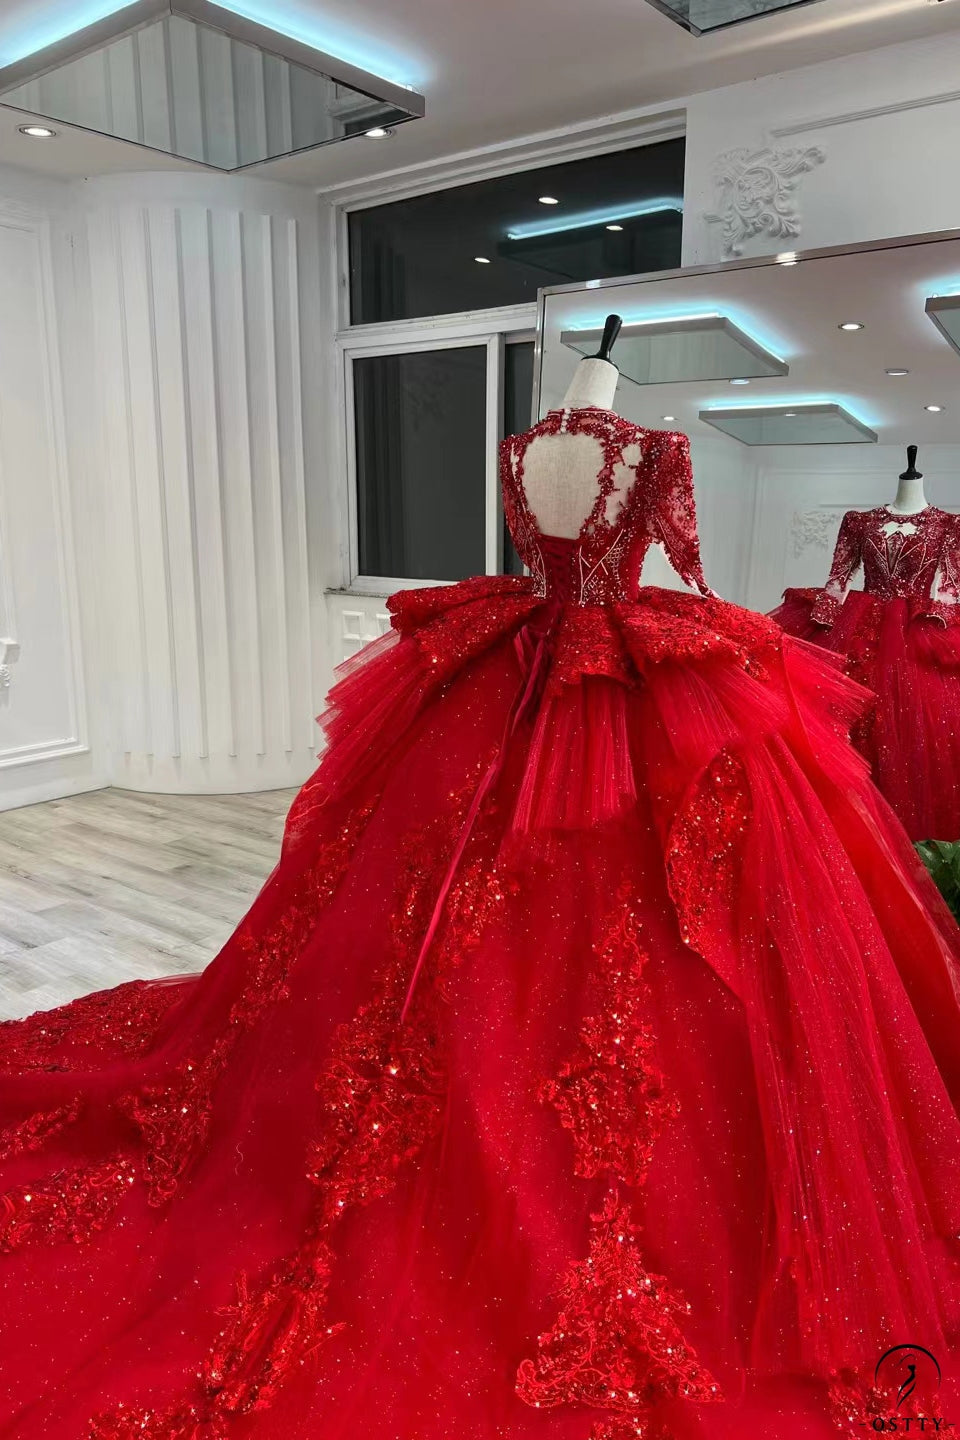 Passion Red Queen Style Sleeves Red Sparkle Ball Gown Wedding Dress With  Beadings, Glitter Tulle & Train Various Styles - Etsy | Ball gowns, Red  ball gowns, Gowns